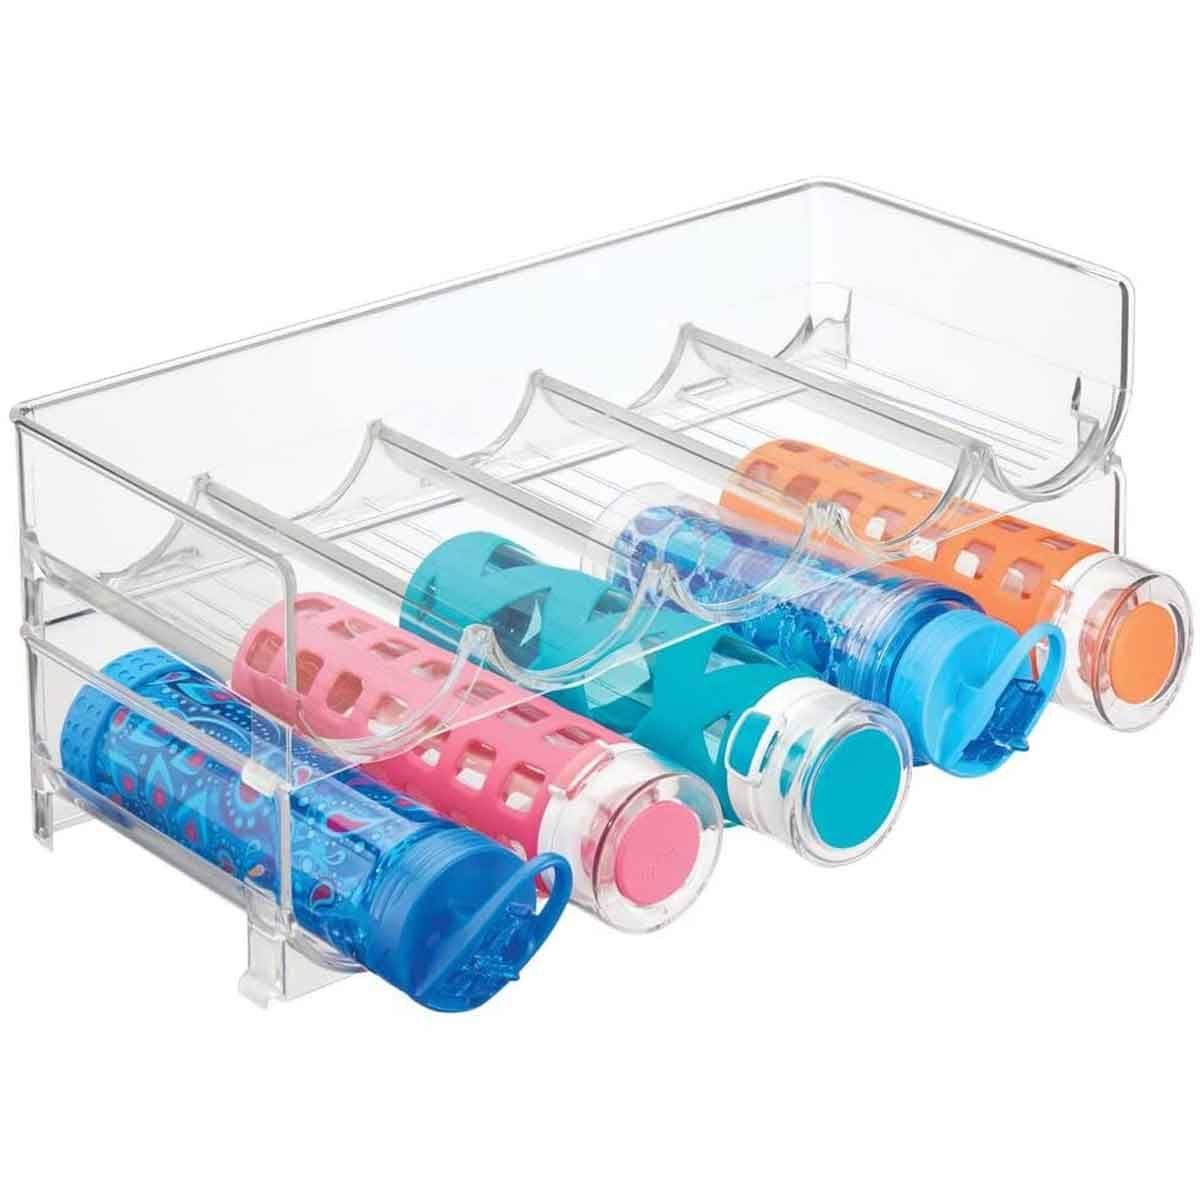 Use a Wine Rack for Water Bottles